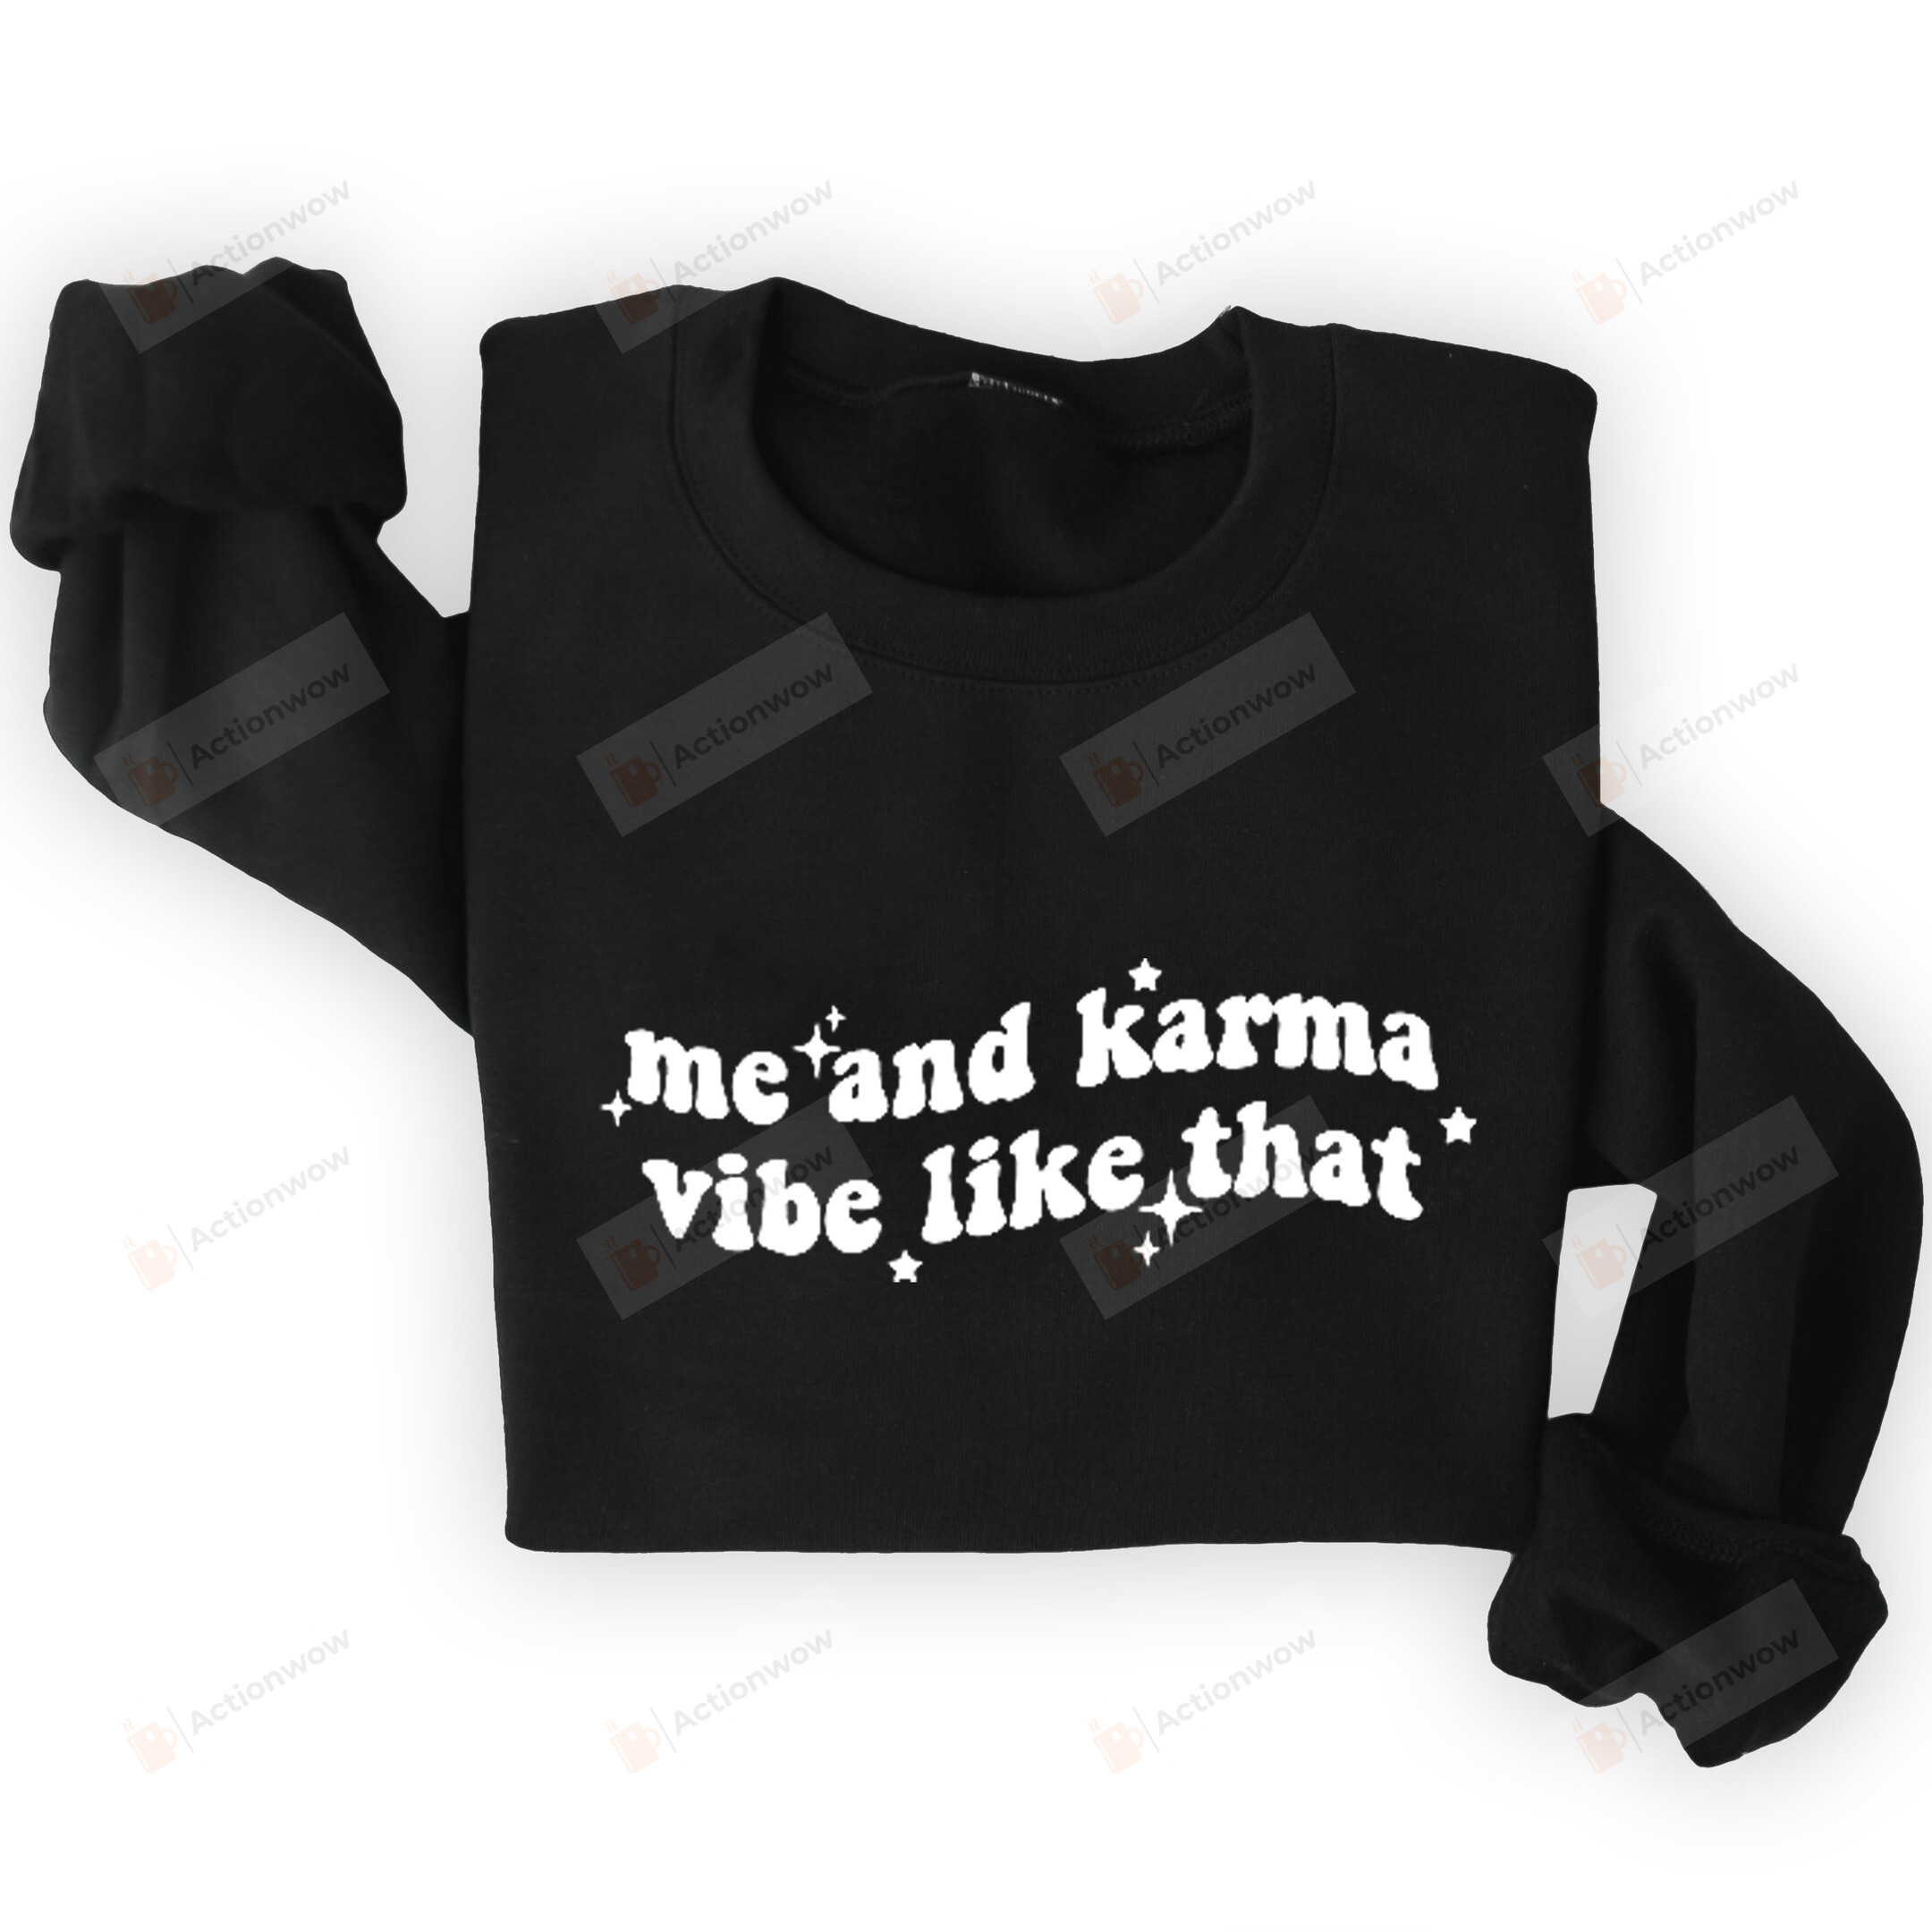 Me And Karma Vibe Like That Sweatshirt, Christmas Midnight Shirt Gifts For Men For Women